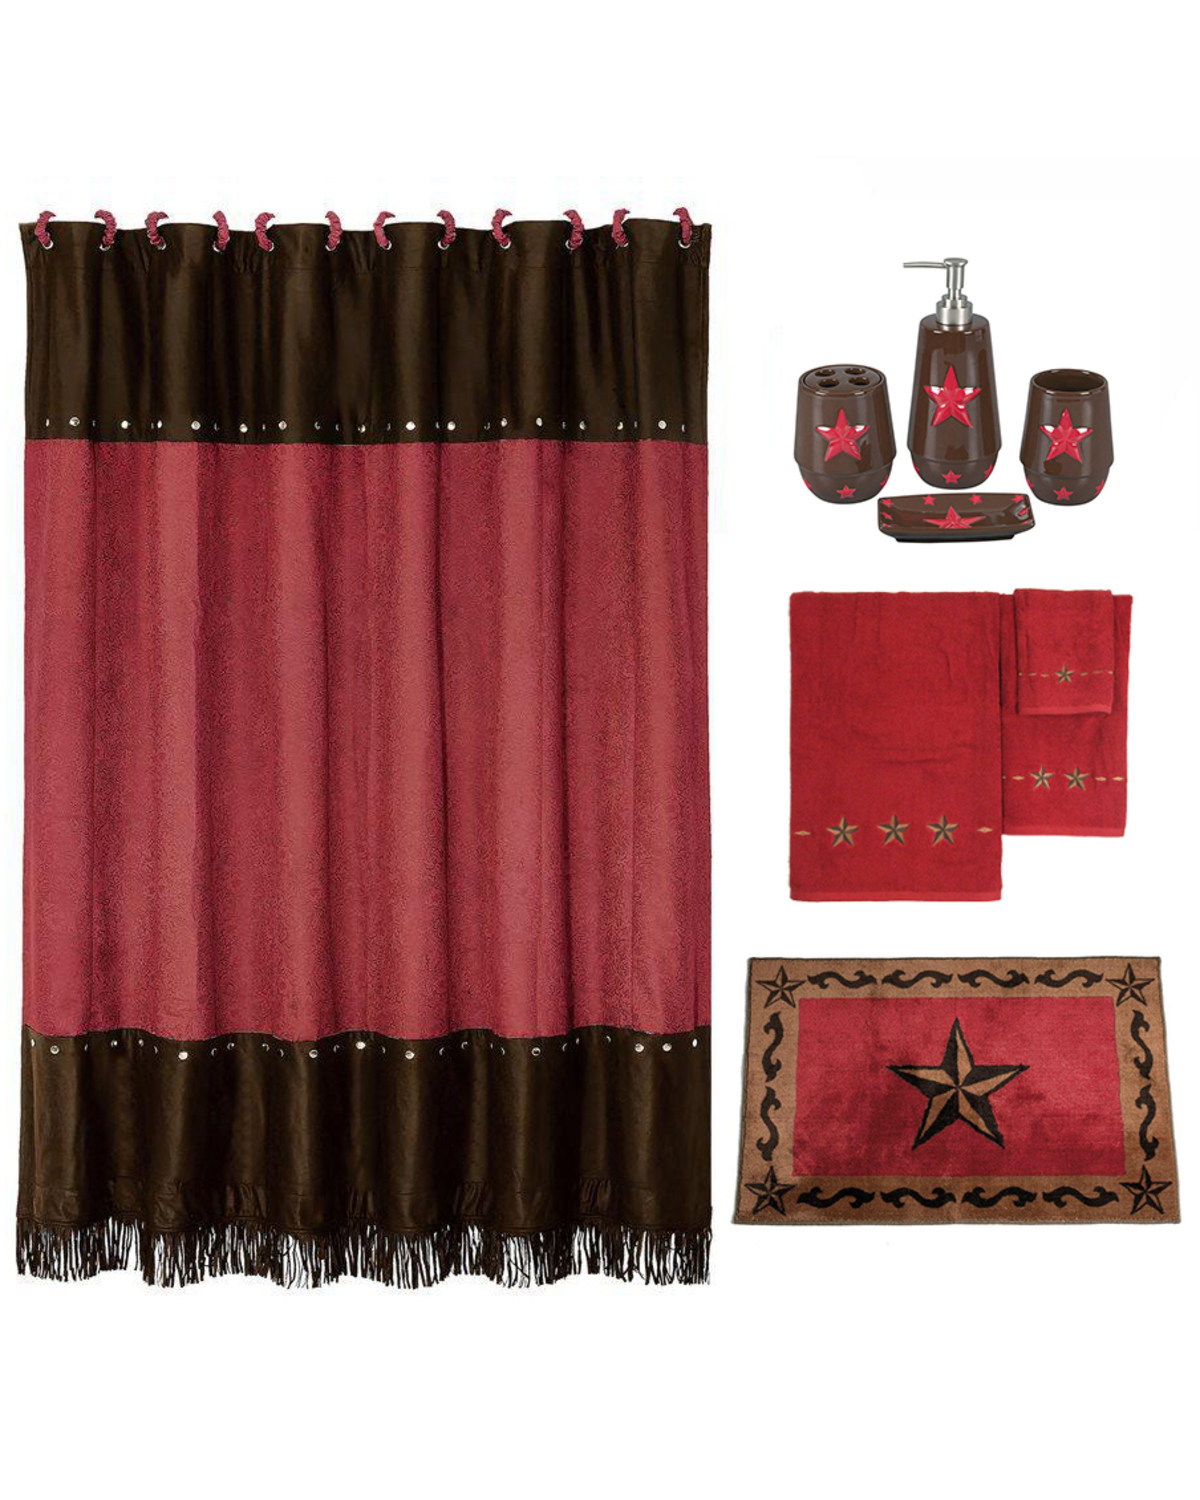 HiEnd Accents Red Star 9pc Bath Accessory & Towel Set